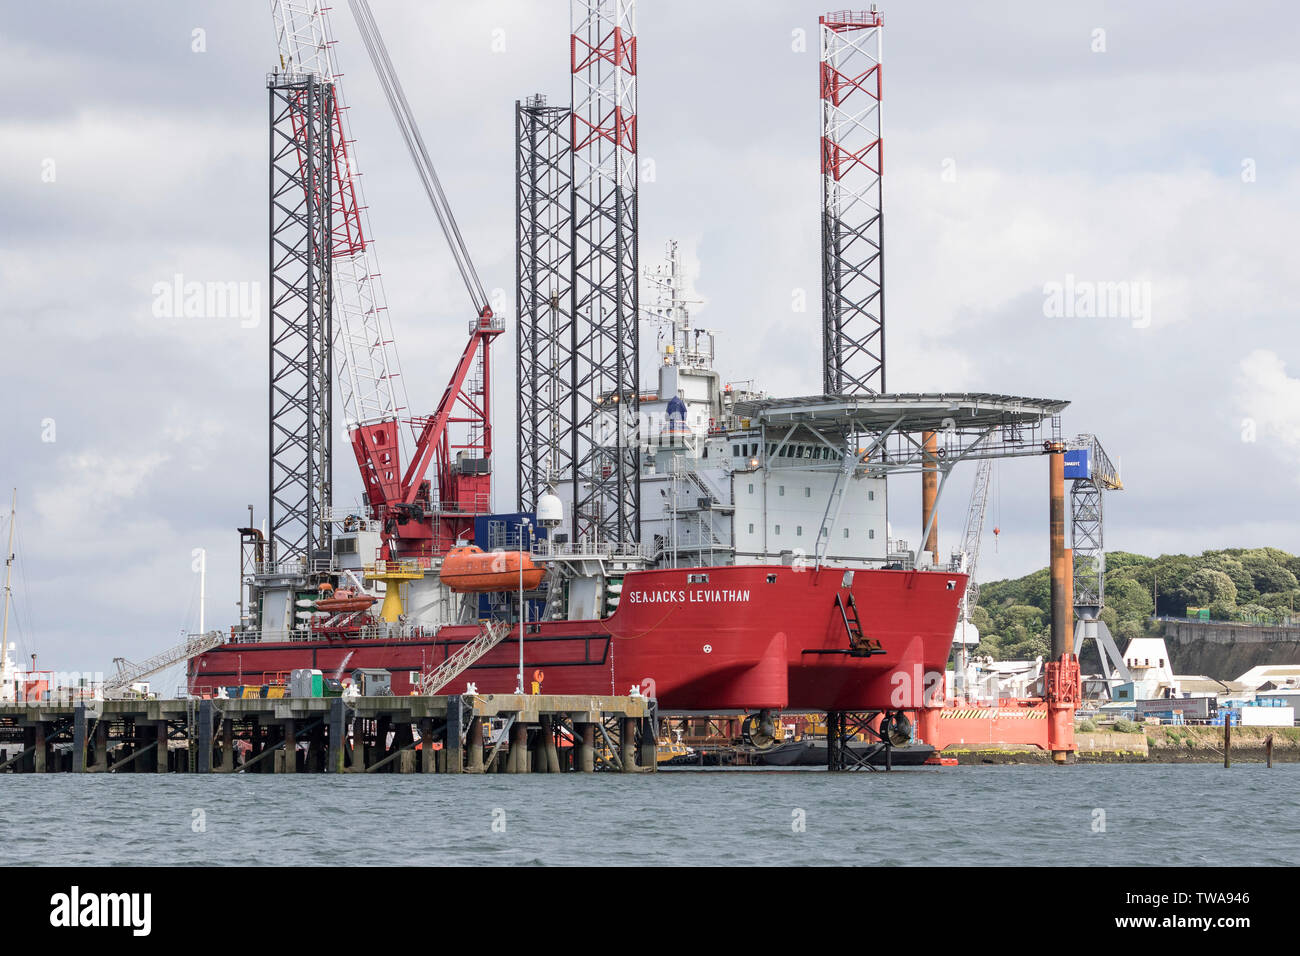 SeaJacks Leviathan Offshore, Self Prpelled Support Vessel in Falmouth Docks Stock Photo